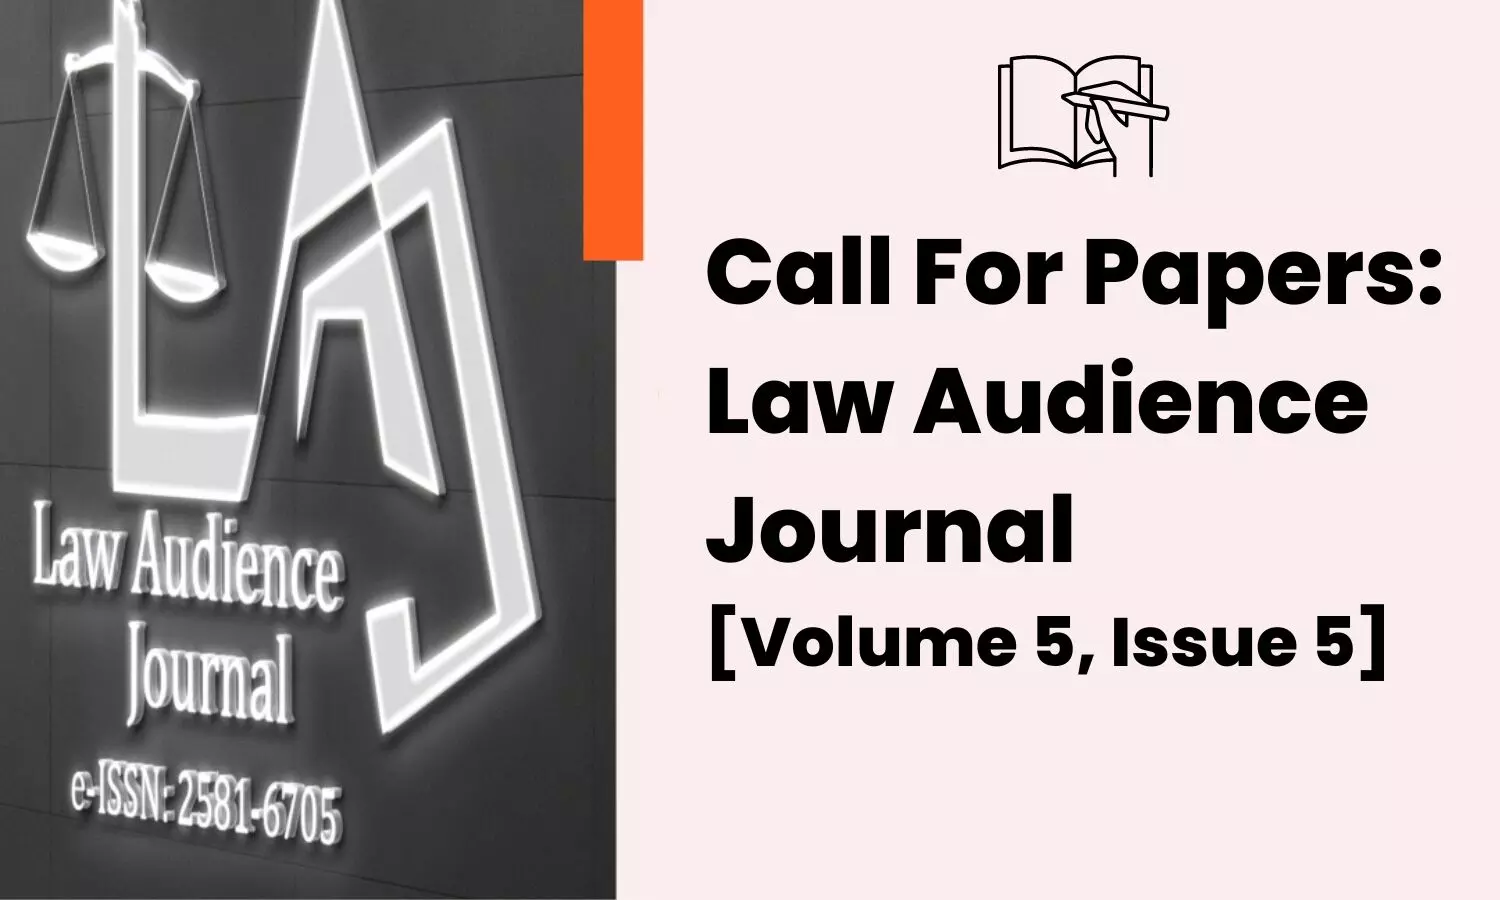 Call For Papers: Law Audience Journal Volume 5, Issue 5 e-ISSN: 2581-6705 [Submit by April 25]